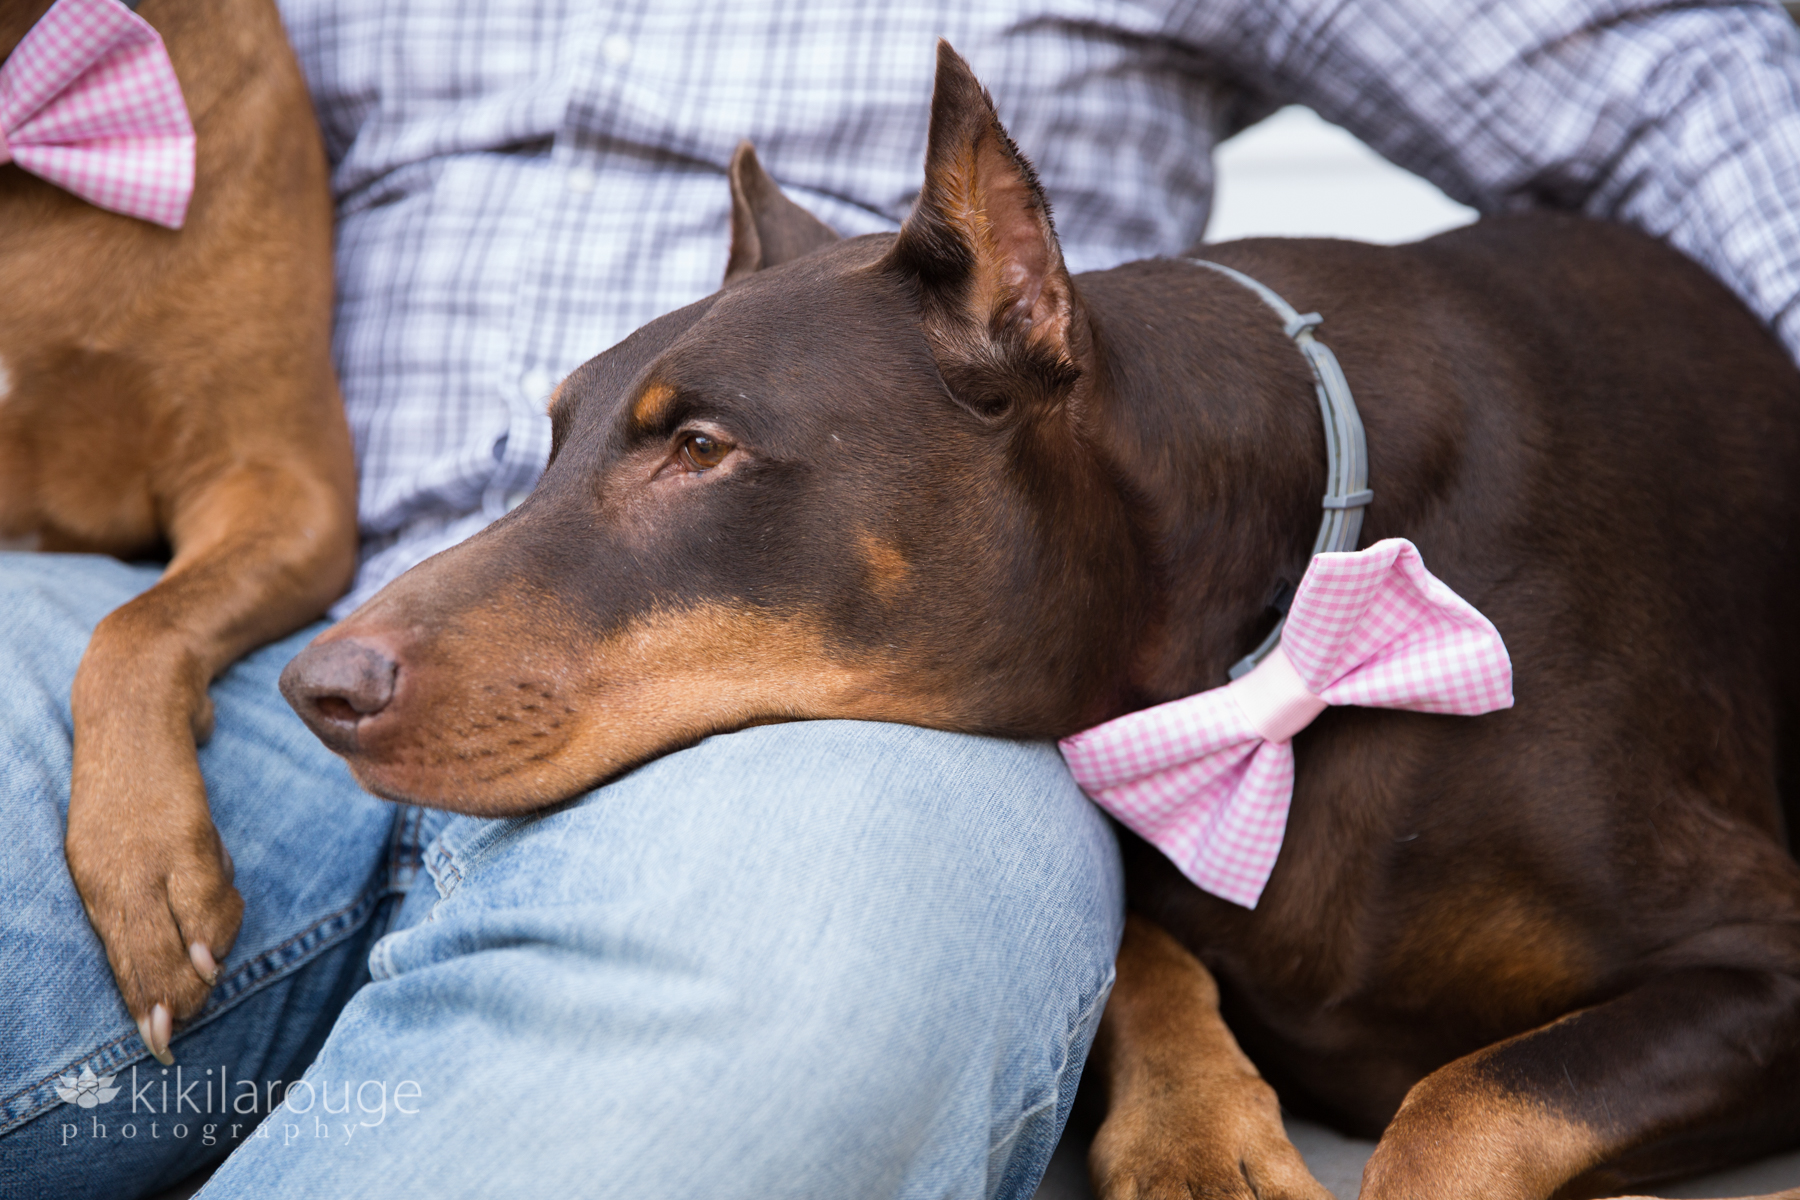 Dog with pink bow tie resting head on man's leg